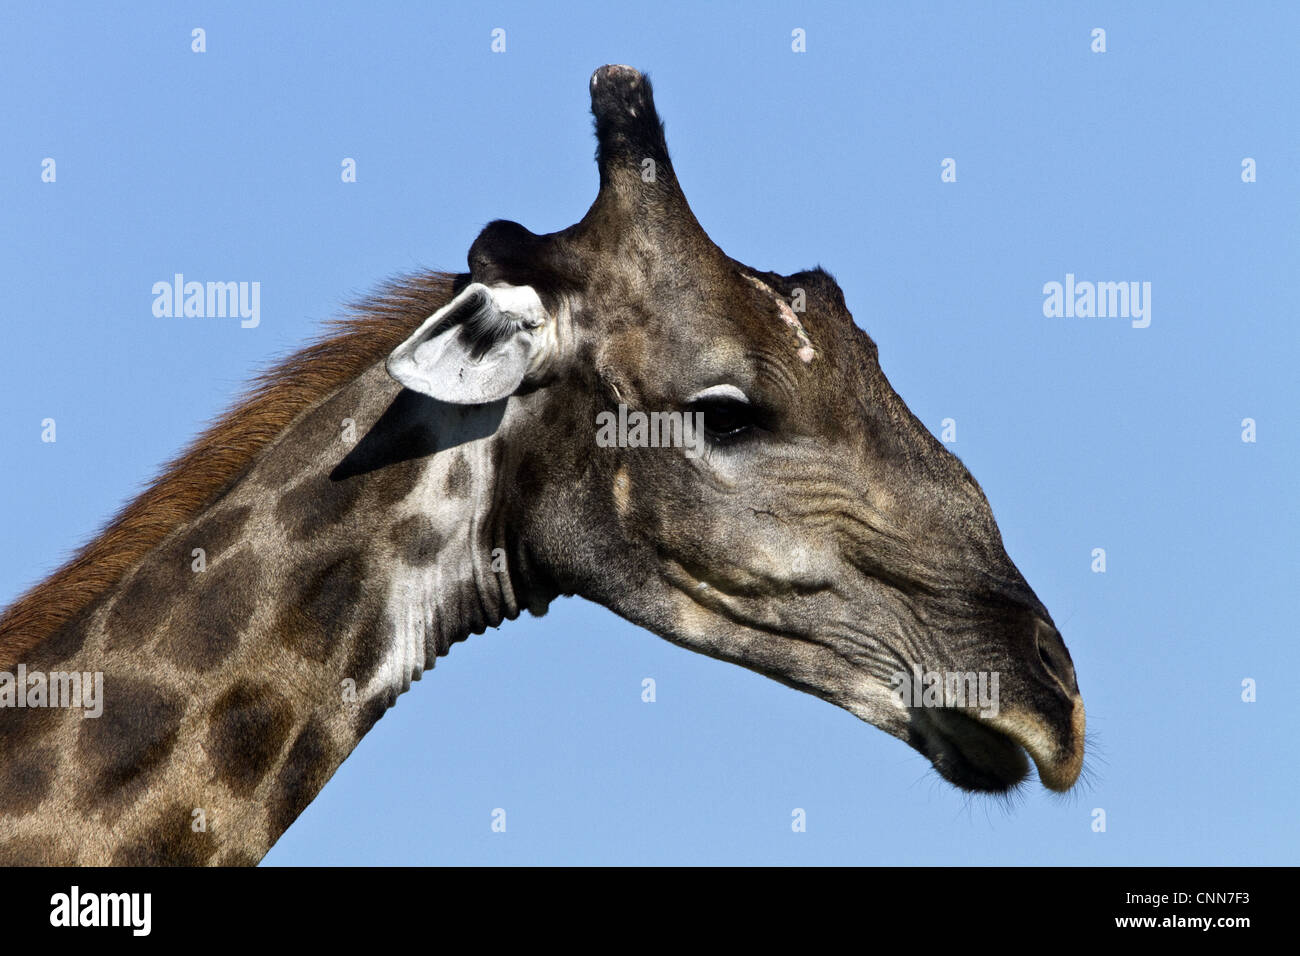 Head of Giraffe showing the horns or sub-conical ossicones. Stock Photo